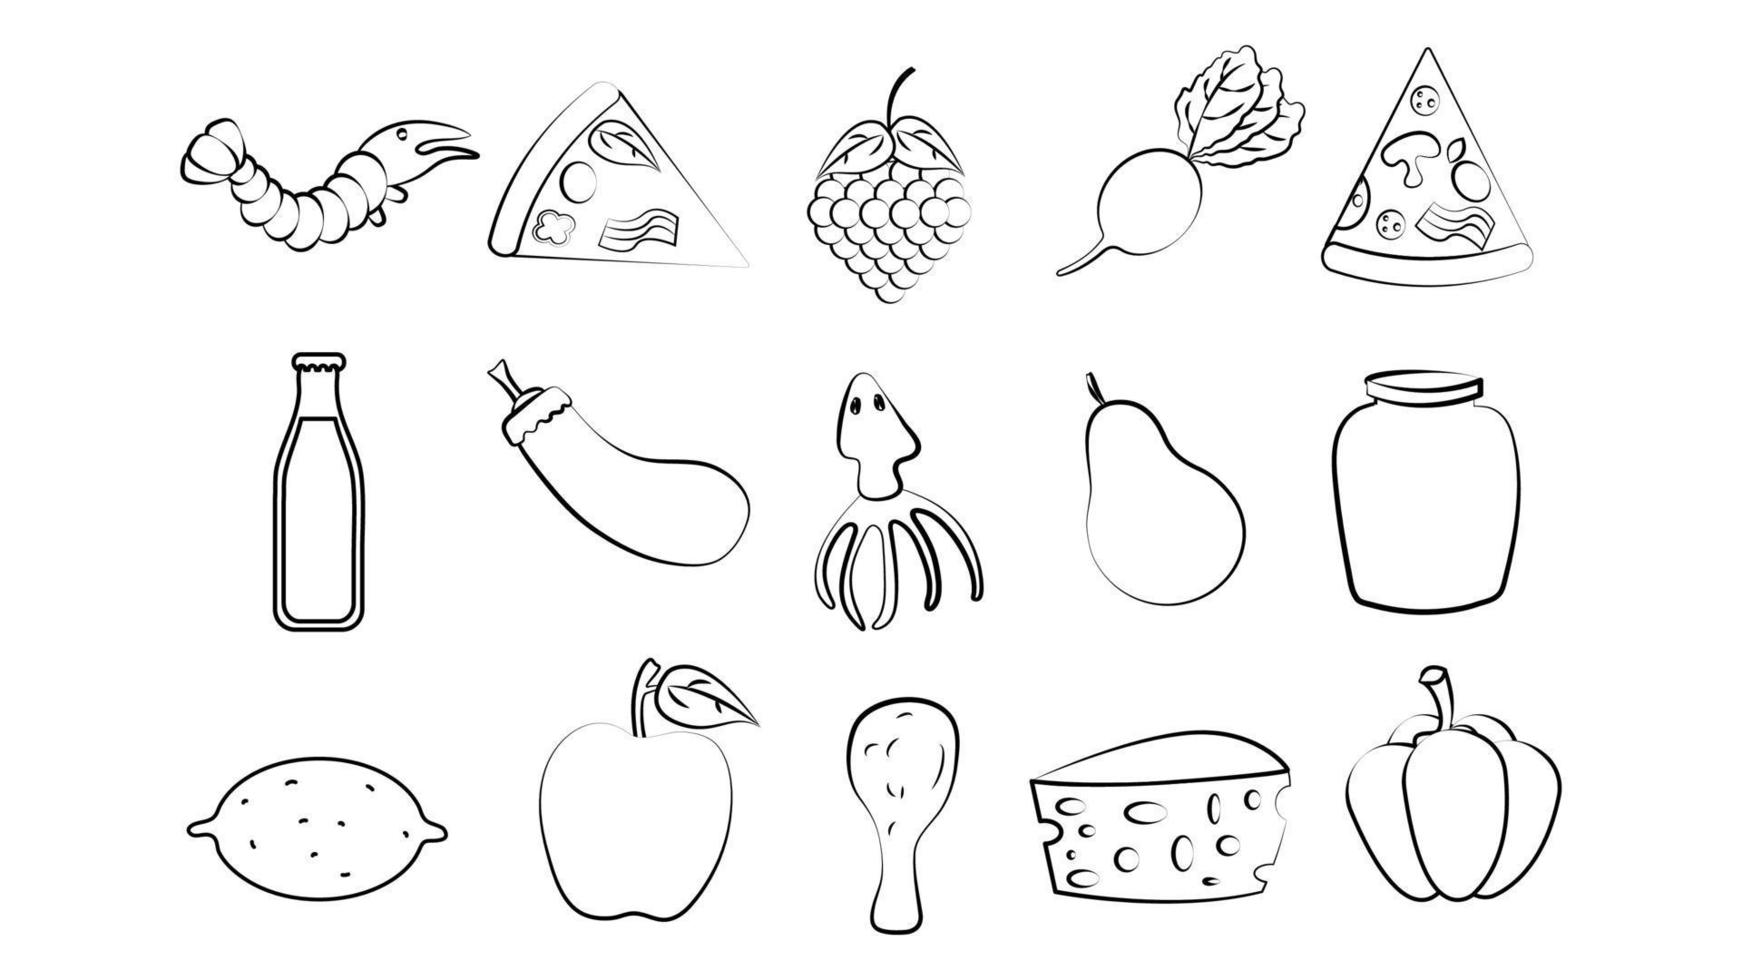 Black and white set of 15 food and snack items icons for restaurant bar cafe shrimp, pizza, grapes, radish, soda, eggplant, squid, apple, cheese, lemon. The background vector